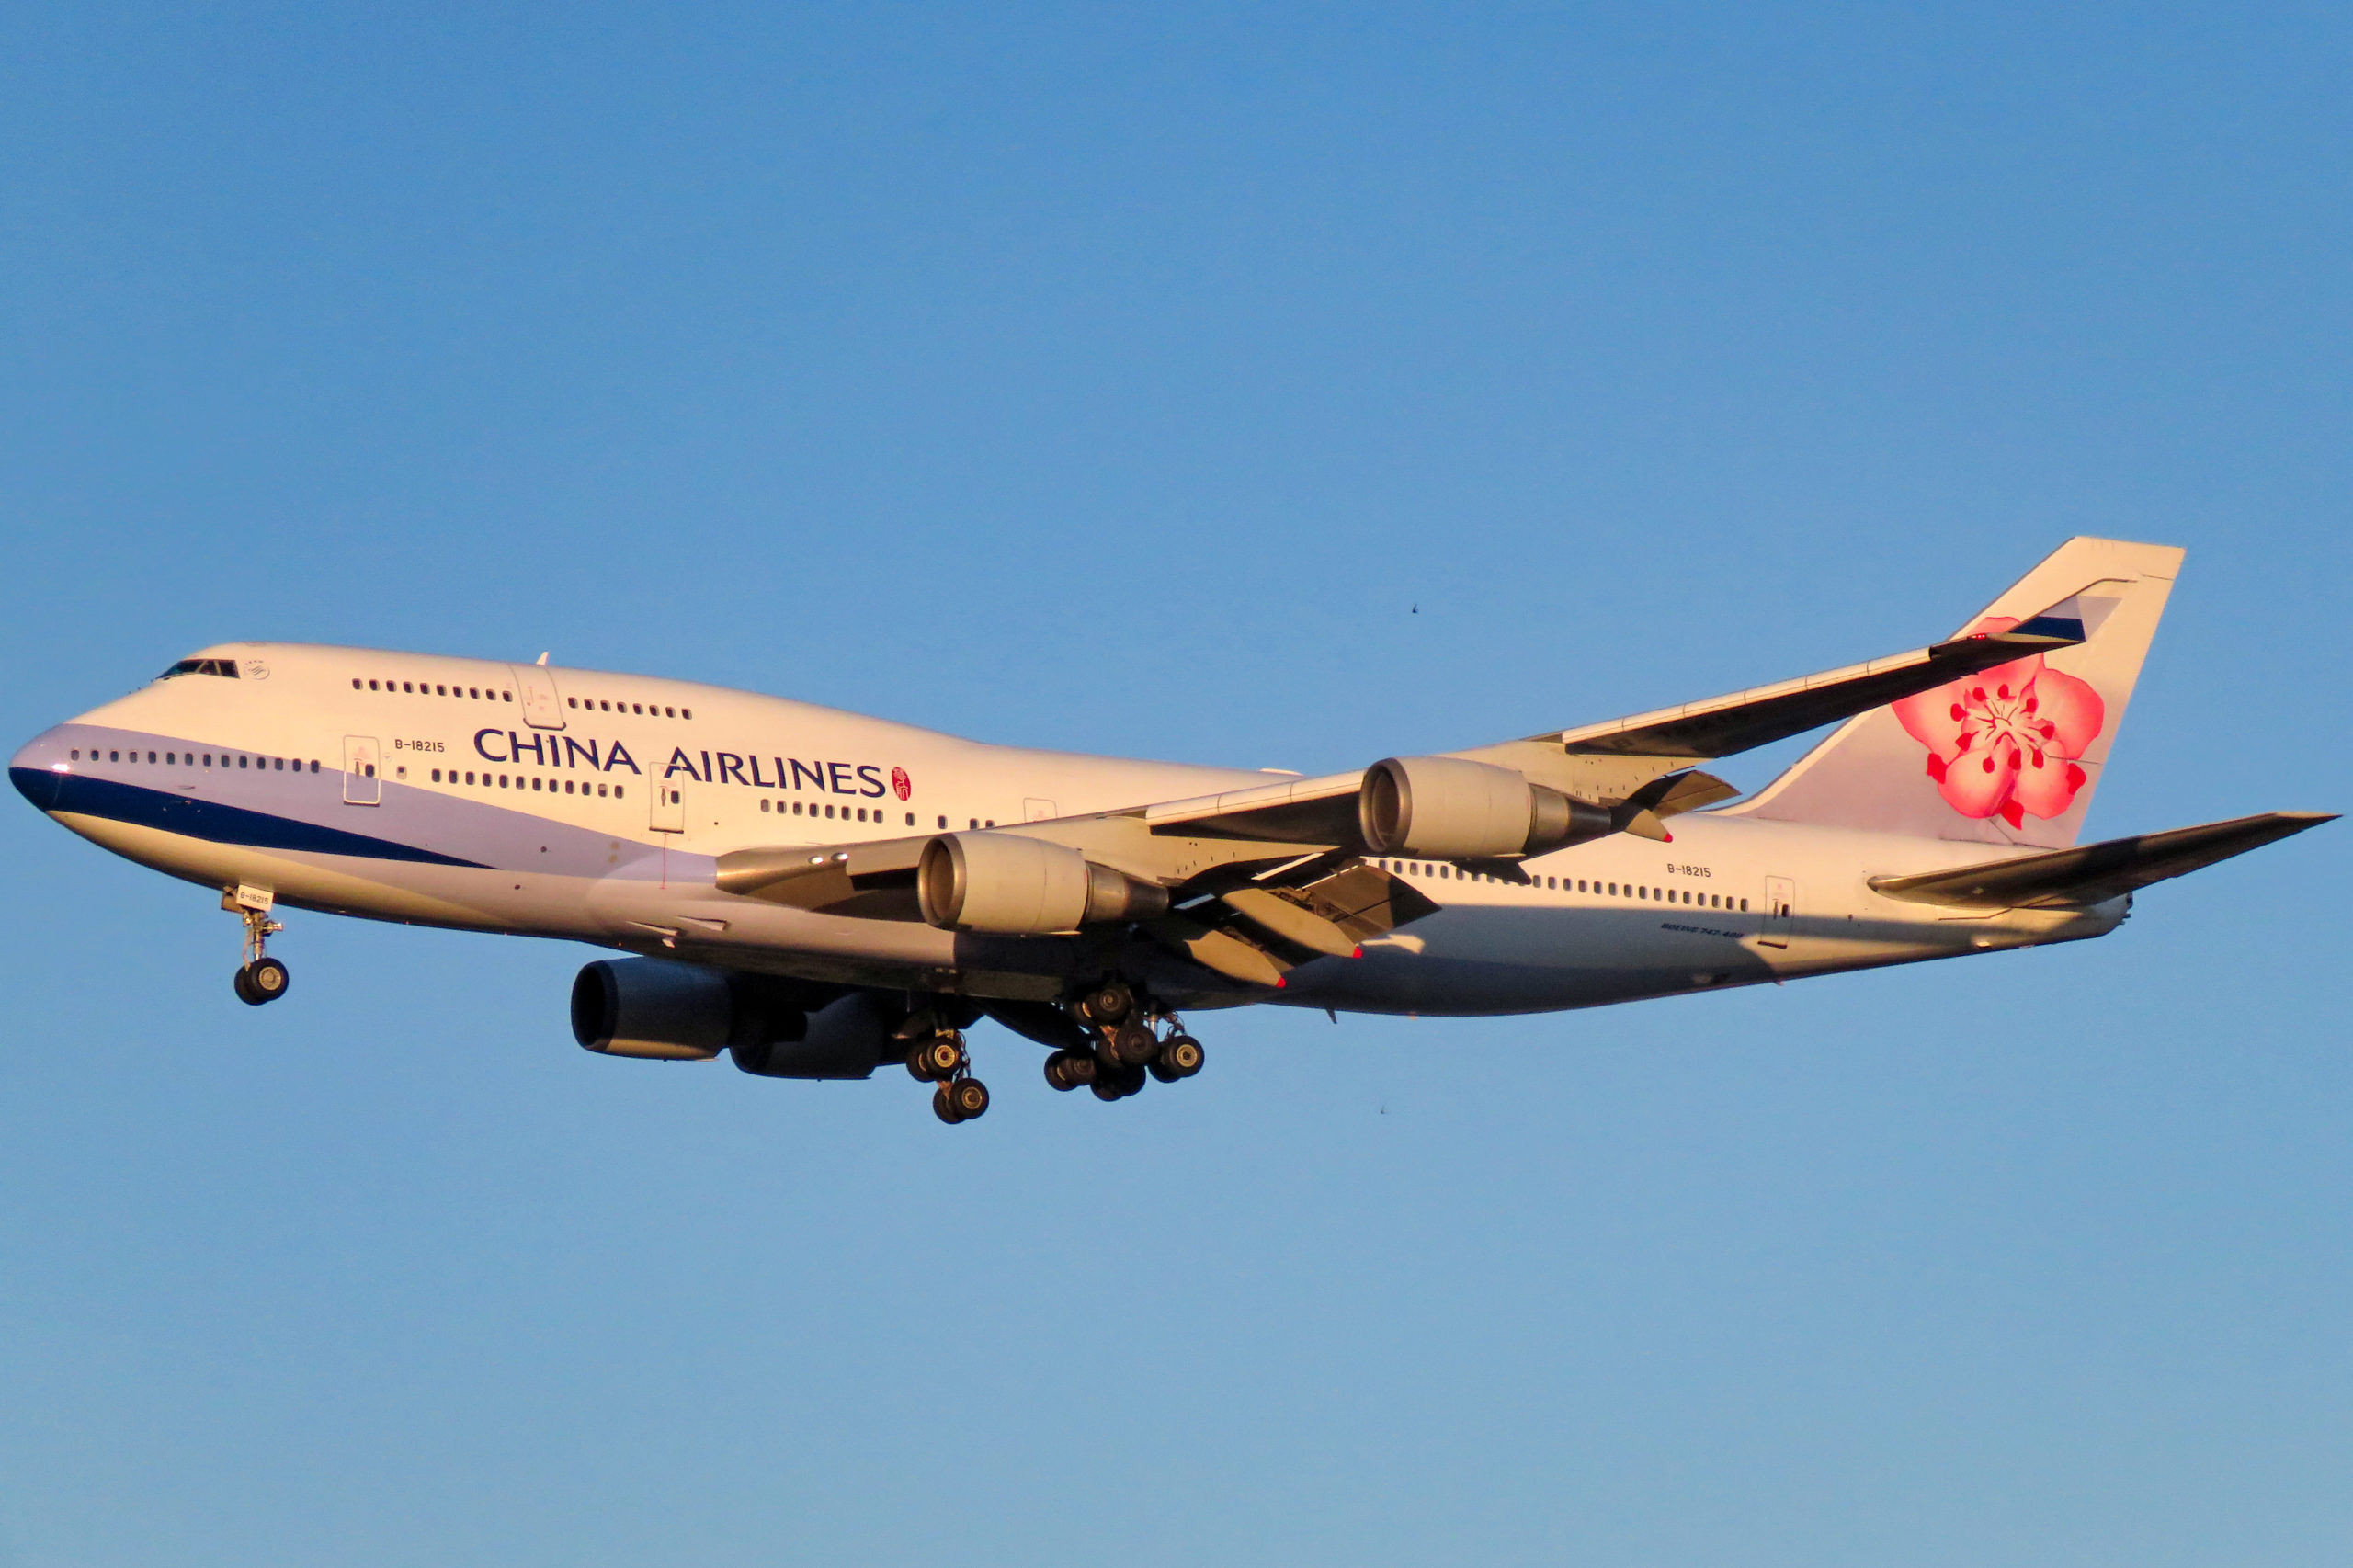 A China Airlines B747 with landing gear down.